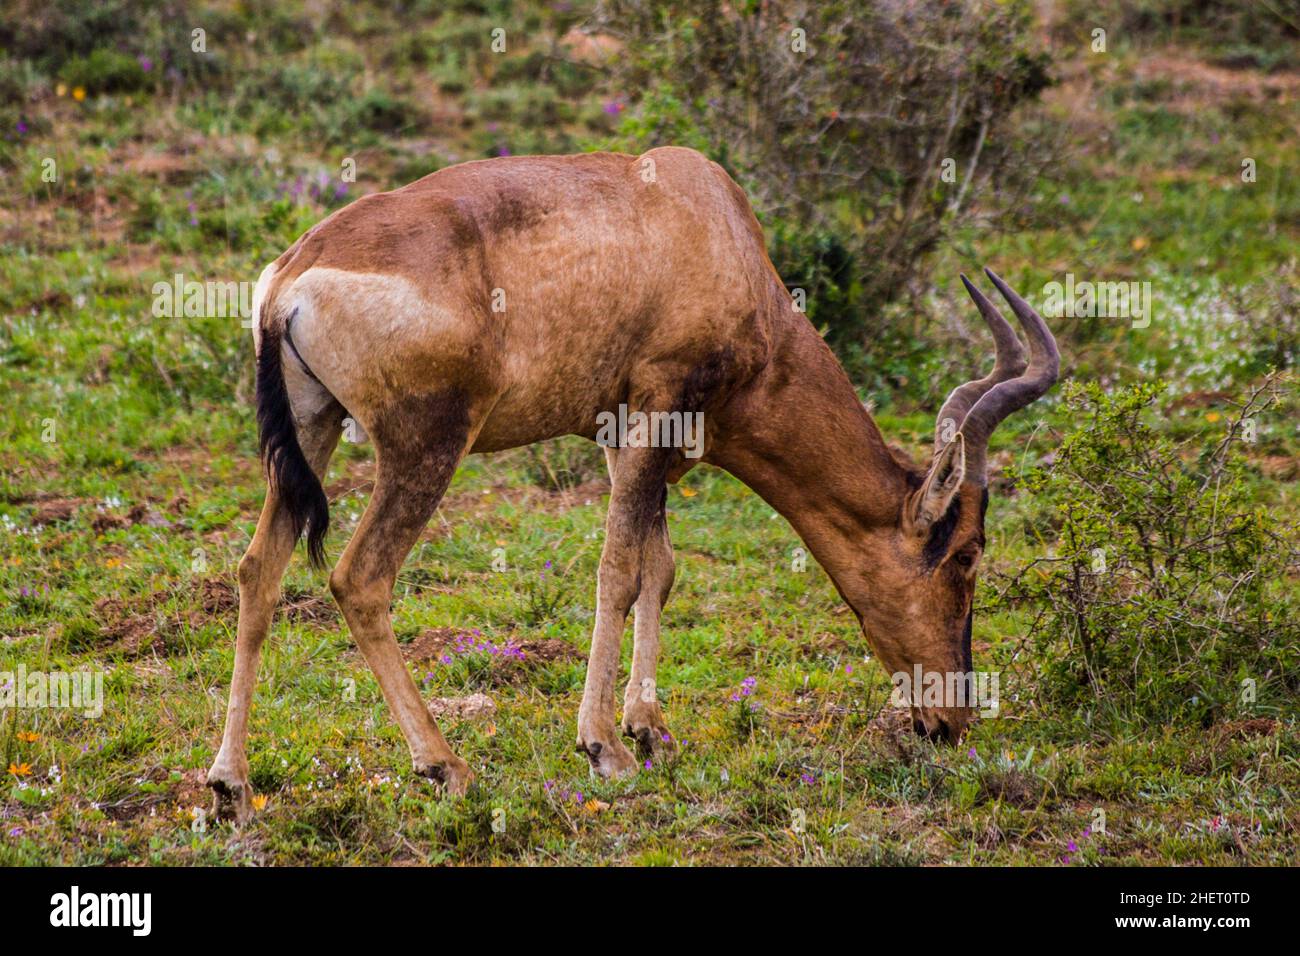 Hartebeest (Alcelaphus), Addo Elephant National Park with over 600 elephants, South Africa Stock Photo